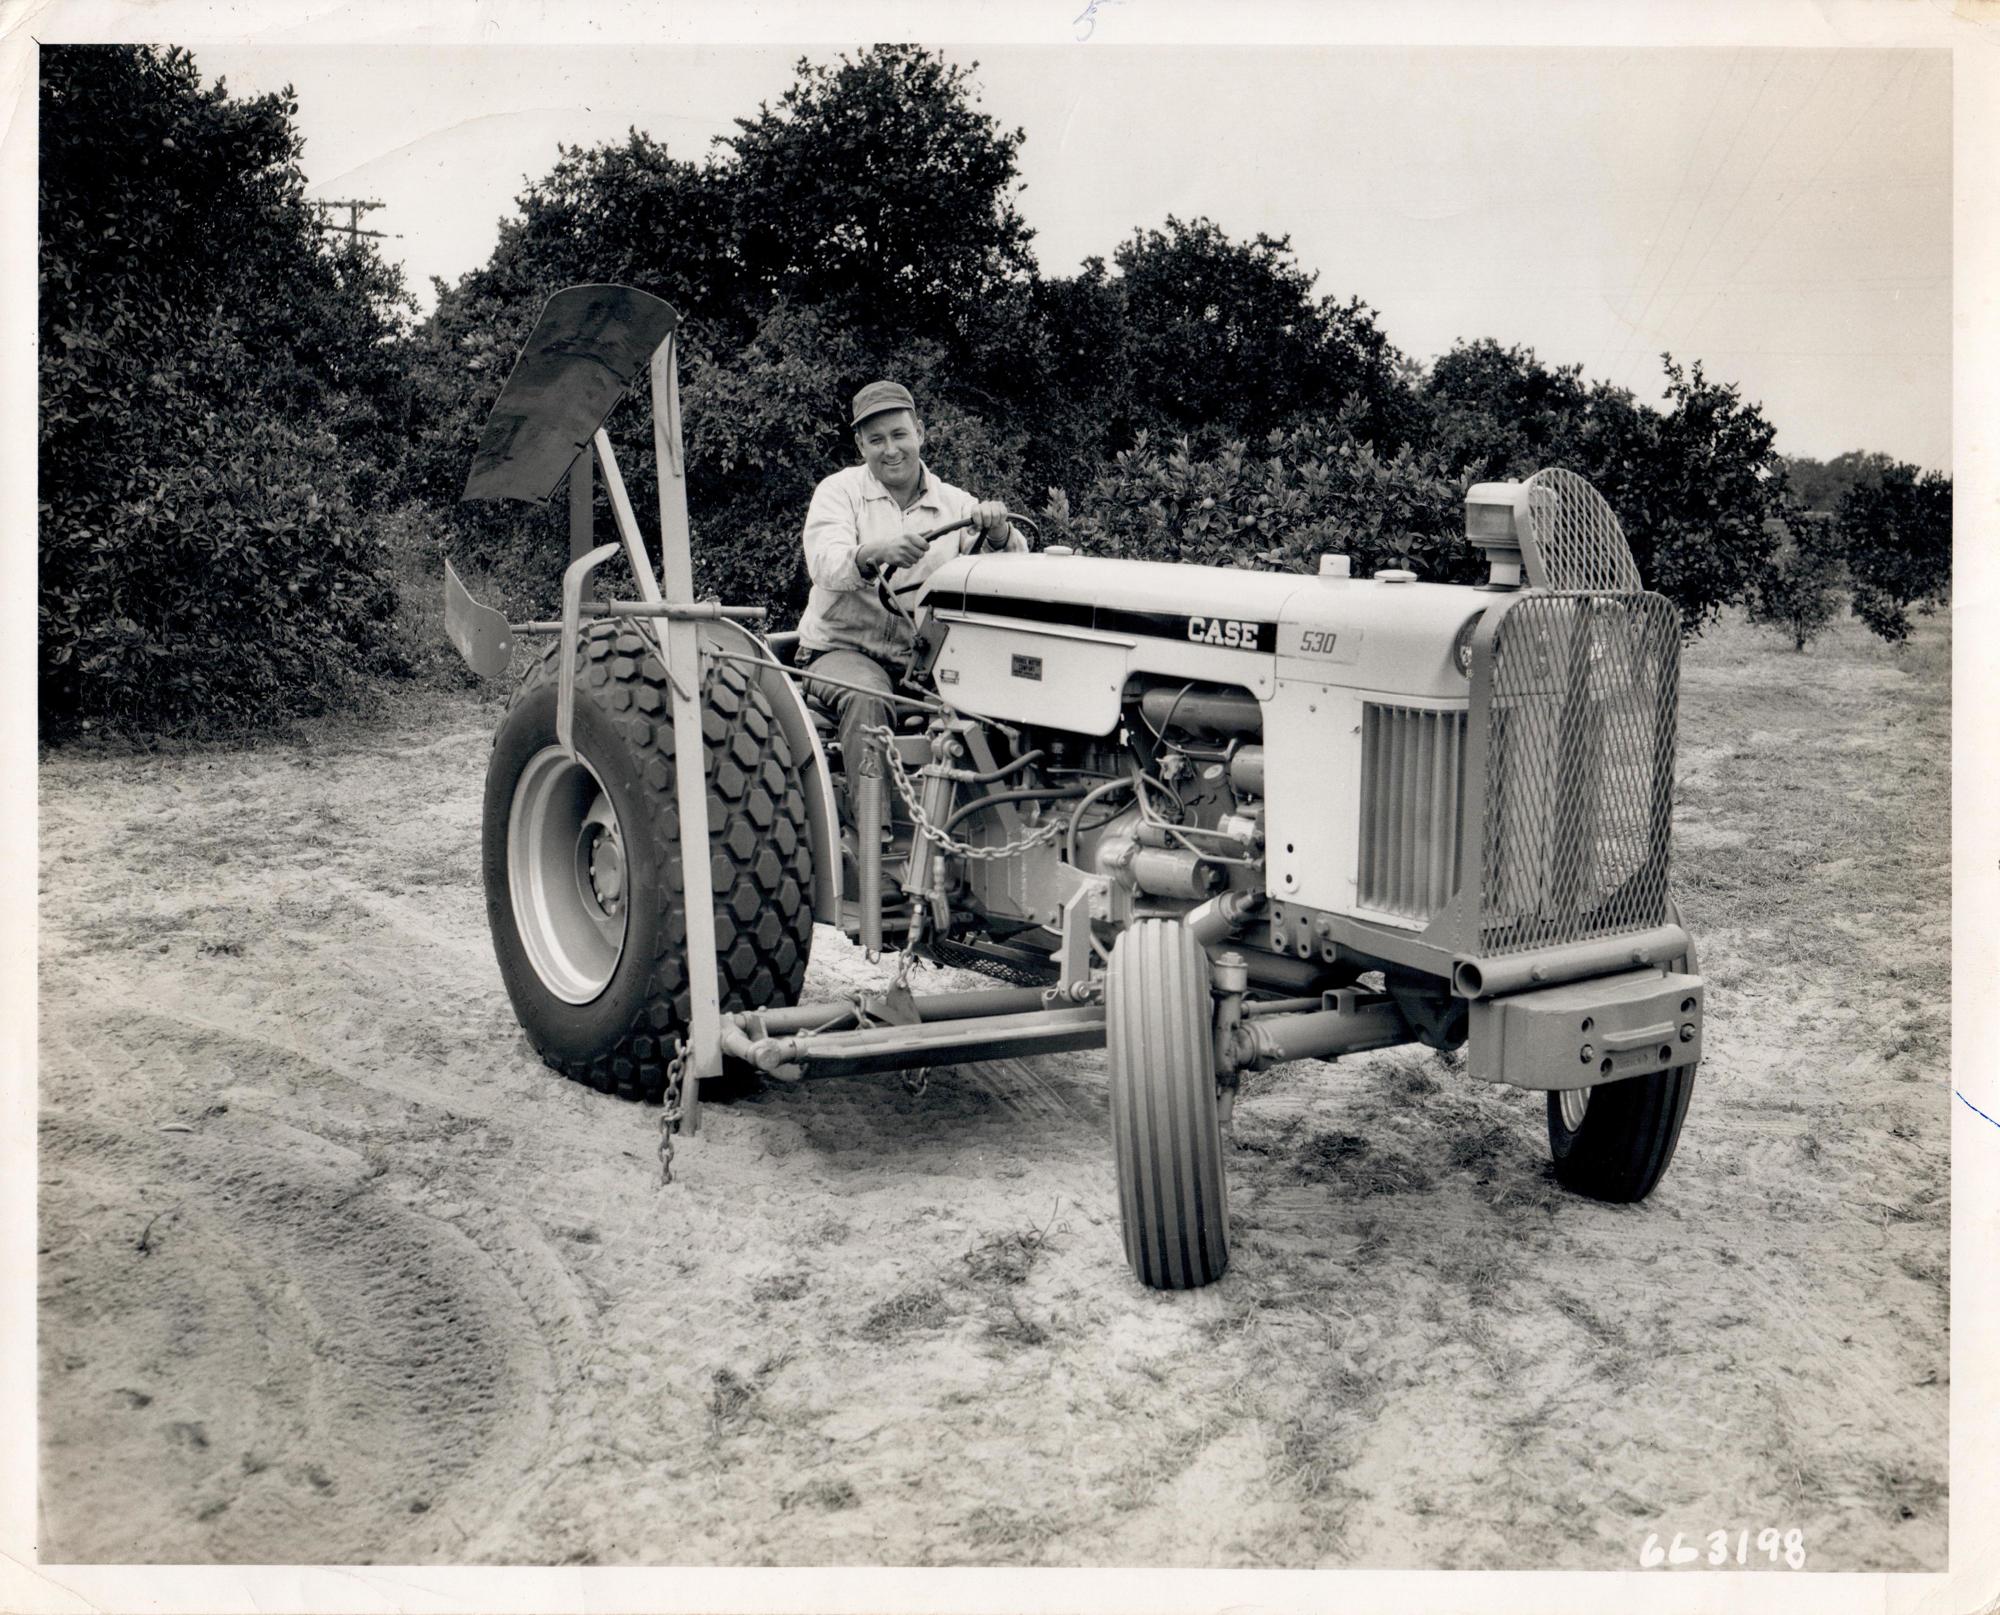 Carlos Watson tested every tractor that came through the doors of Pounds Motor Company in downtown Winter Garden, including this Case 530 tractor and Pounds Young Tree Unbanker.